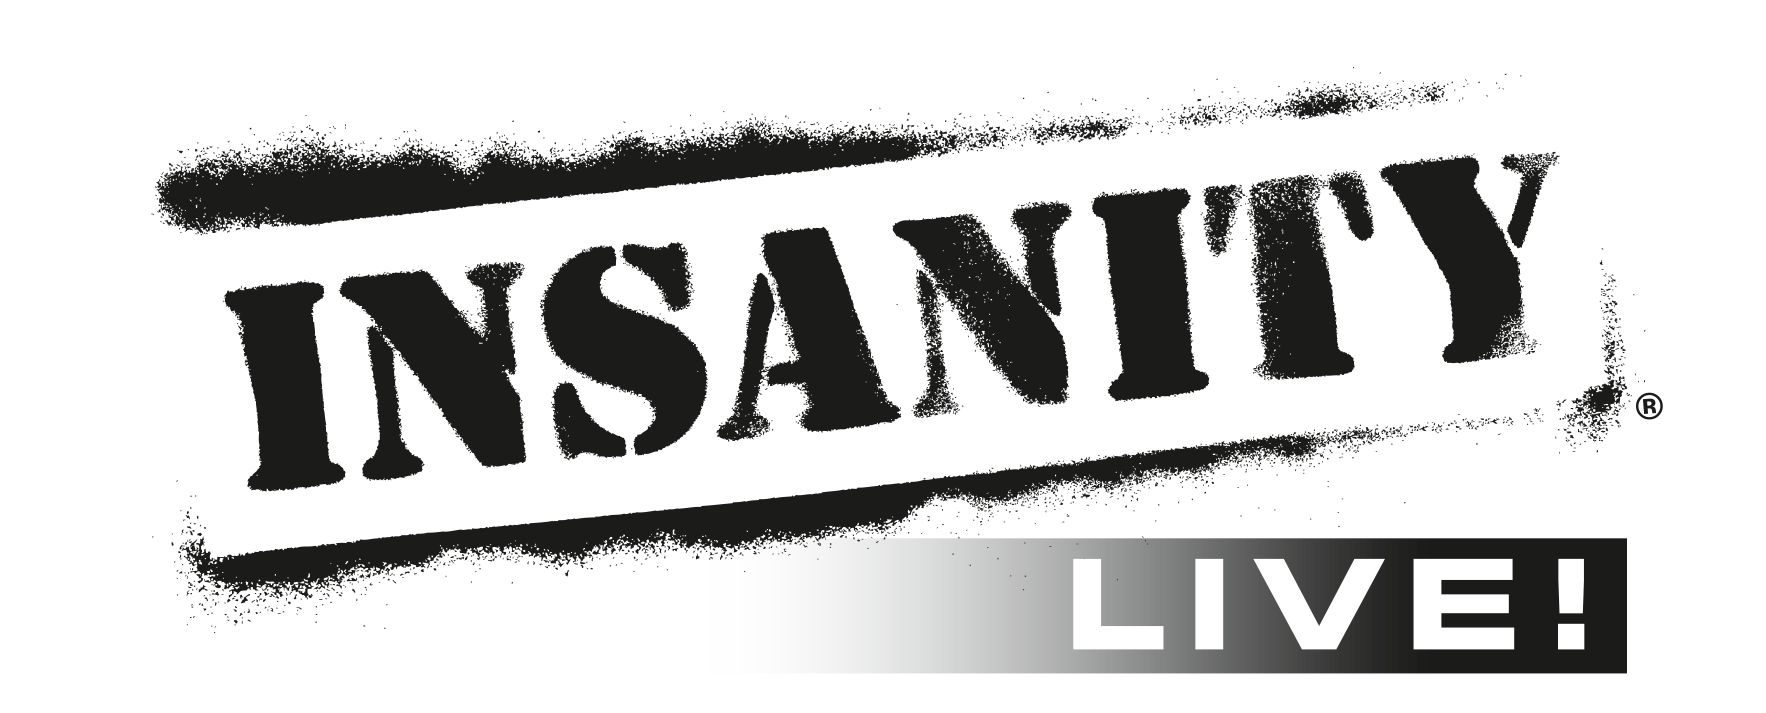 Insanity_Live_Logos_Blk.png